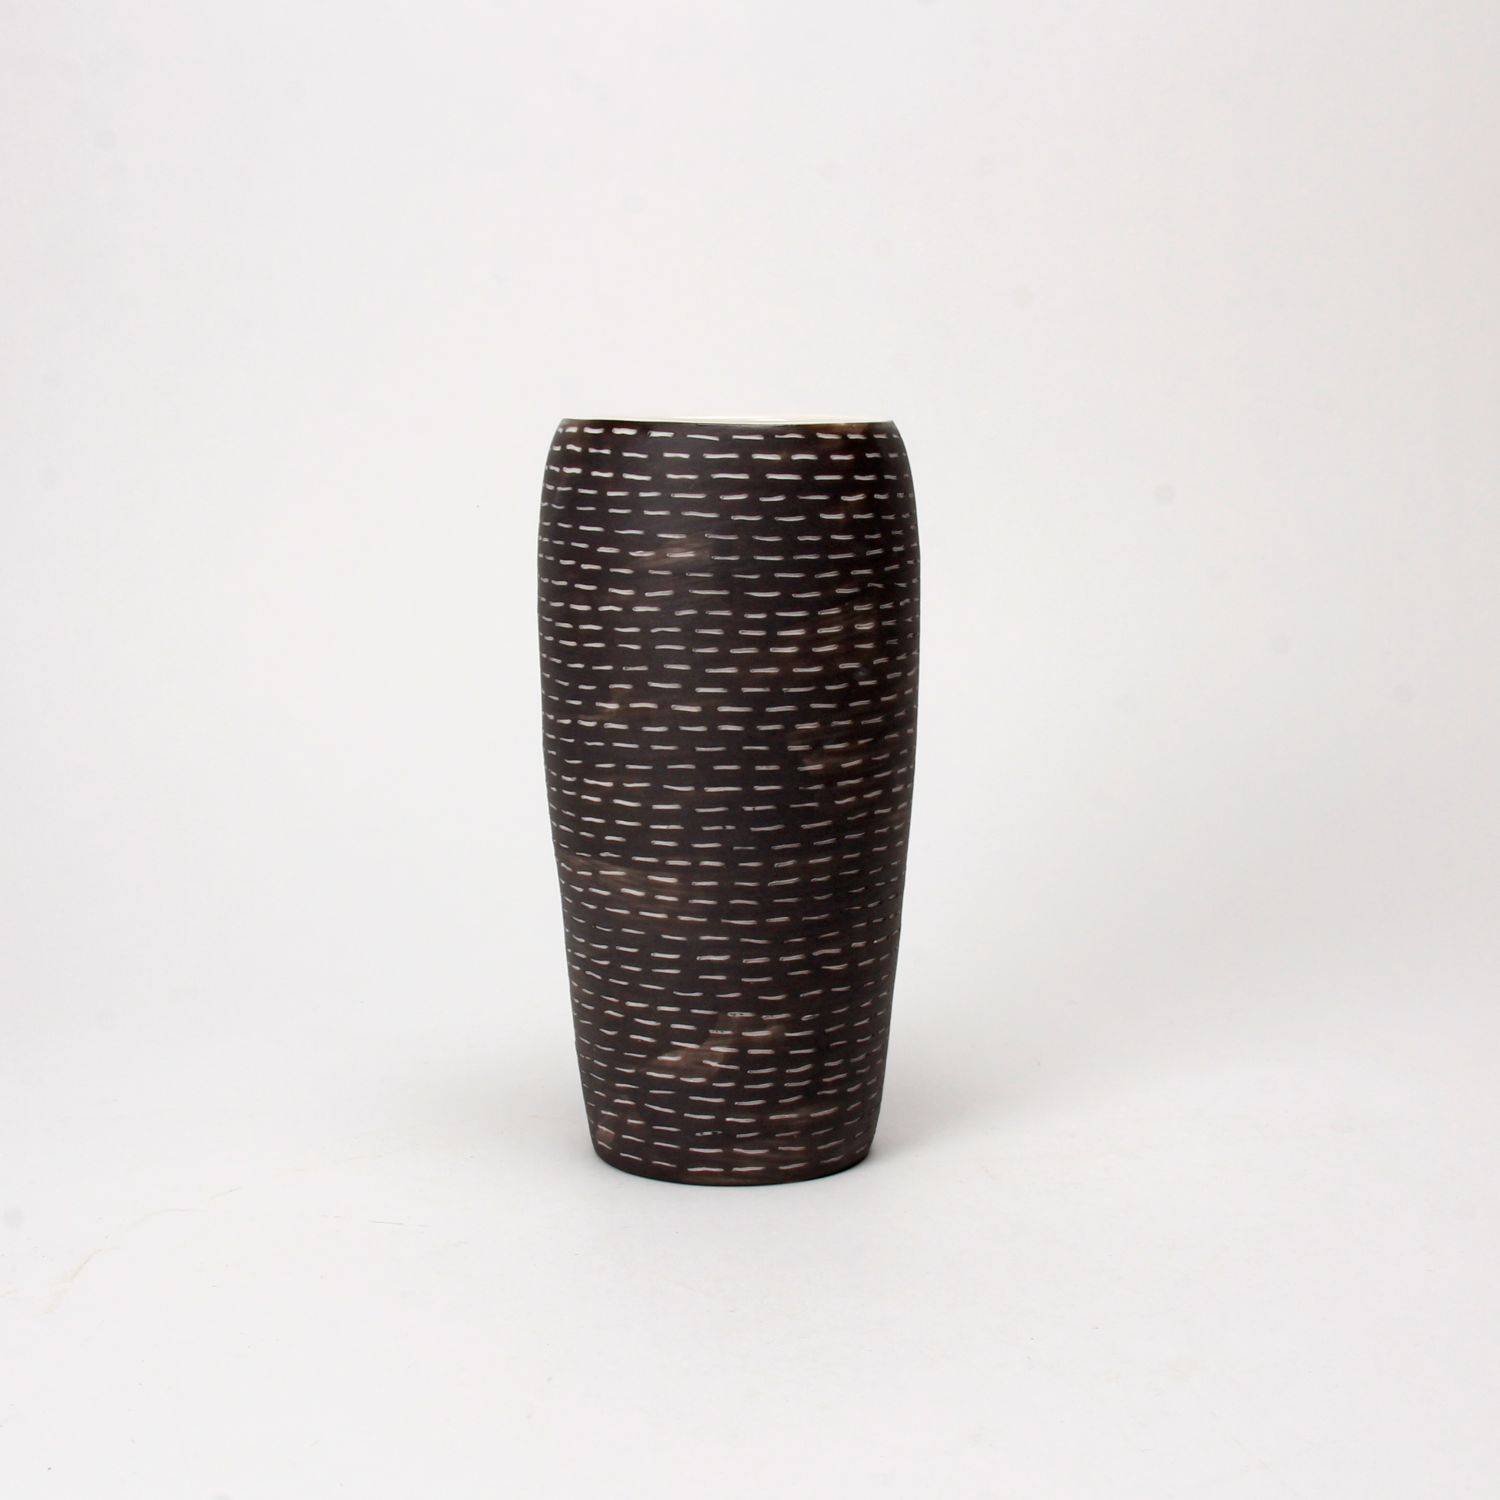 Cuir Ceramics: Black and White Vase Product Image 5 of 5